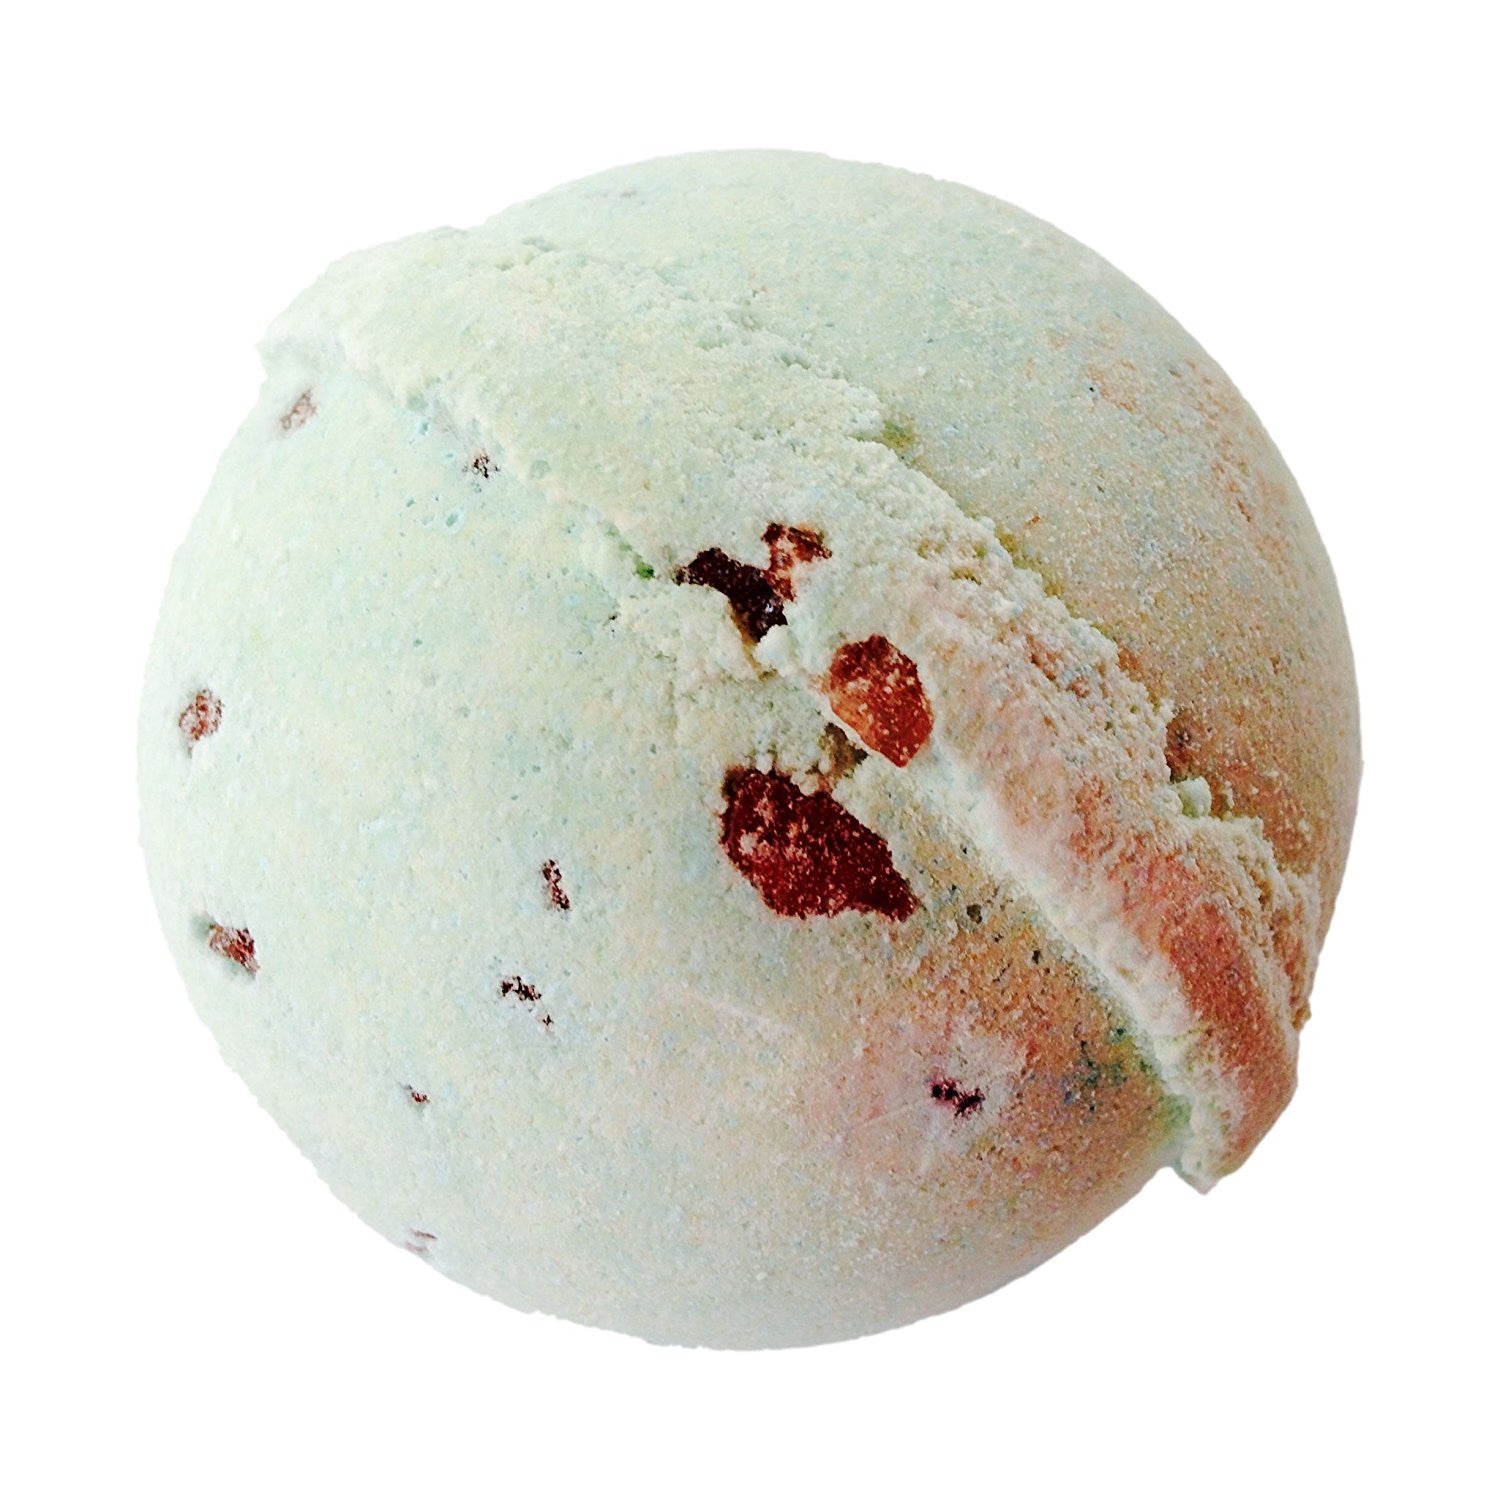 MINT CHIP with Wakame, Bath Bomb Made with Sea Weed and Peppermint 7-8 oz. Ba...